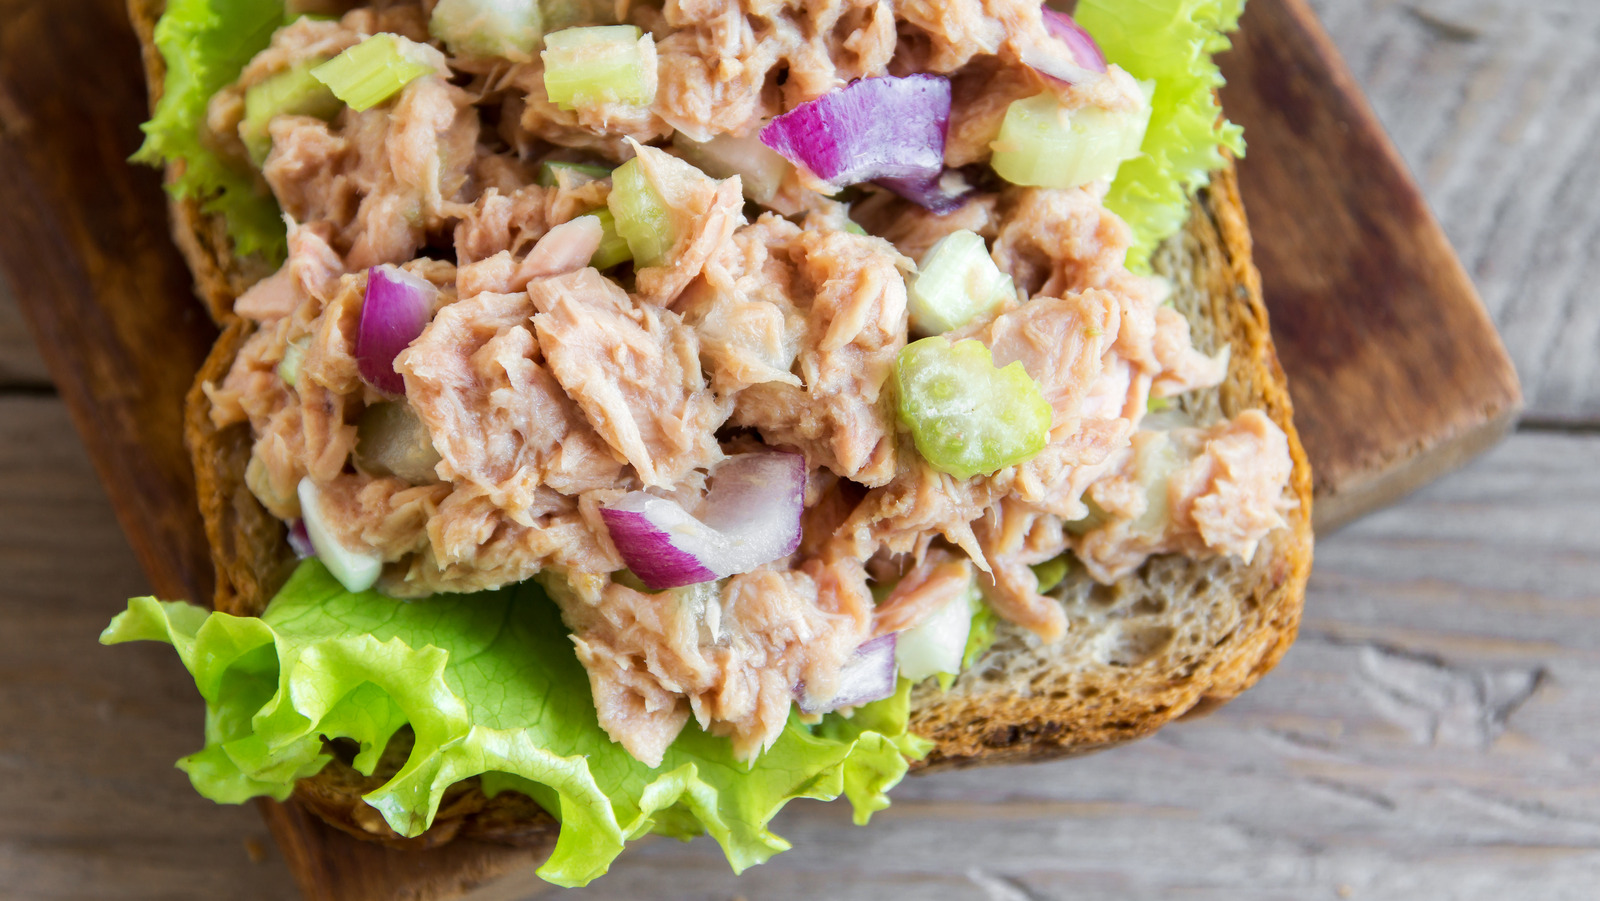 How To Tell If Tuna Salad Has Gone Bad